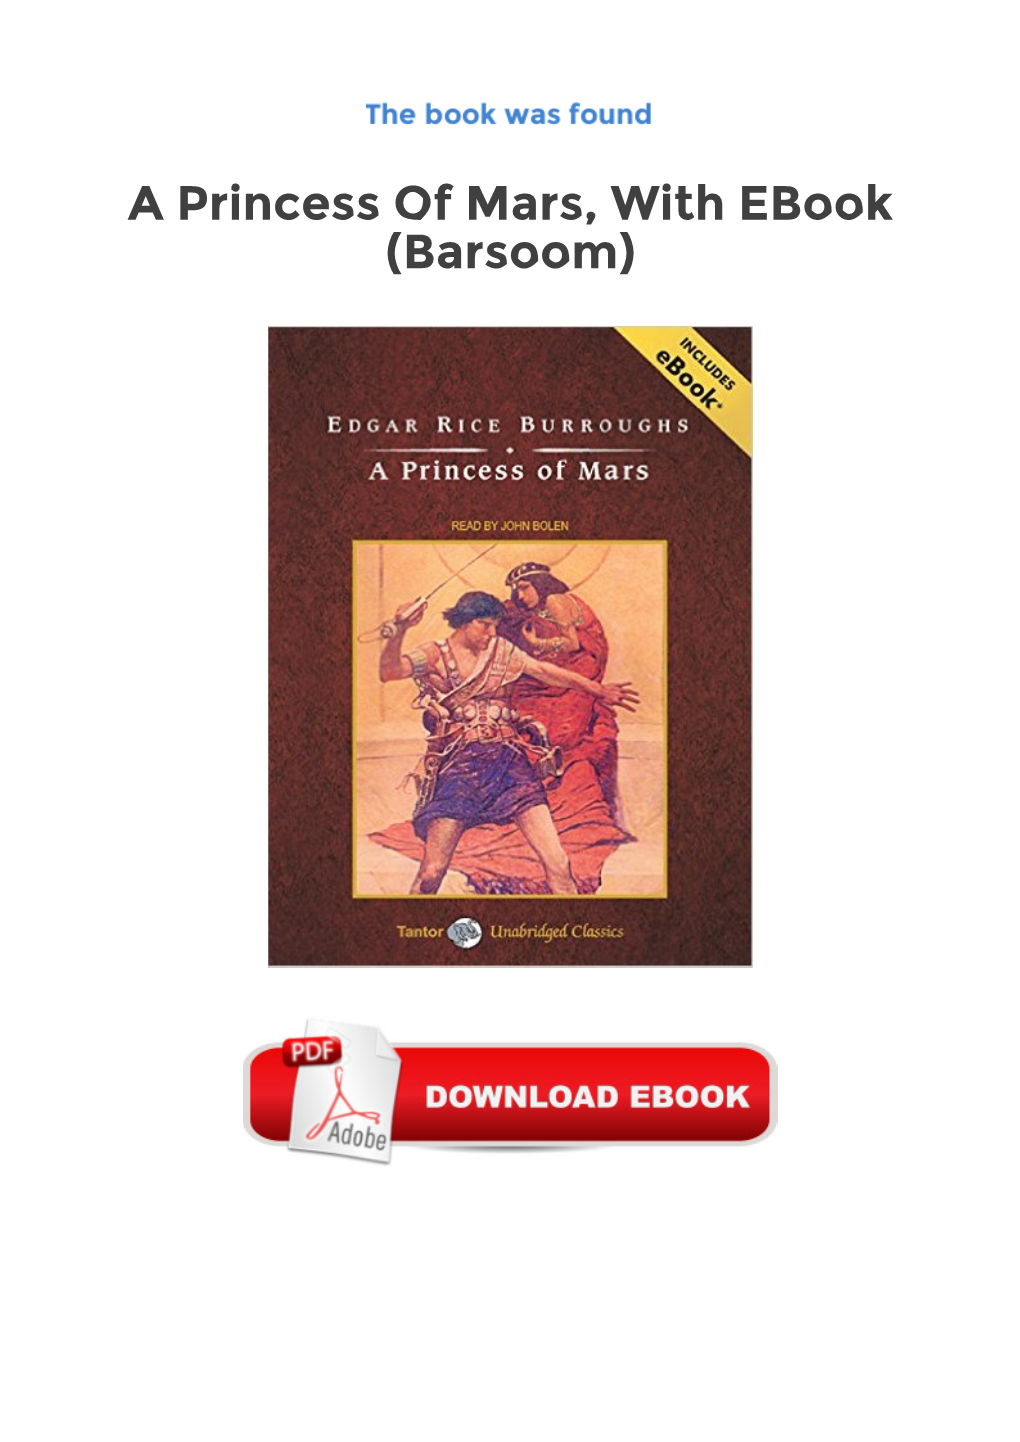 Free Downloads a Princess of Mars, with Ebook (Barsoom)